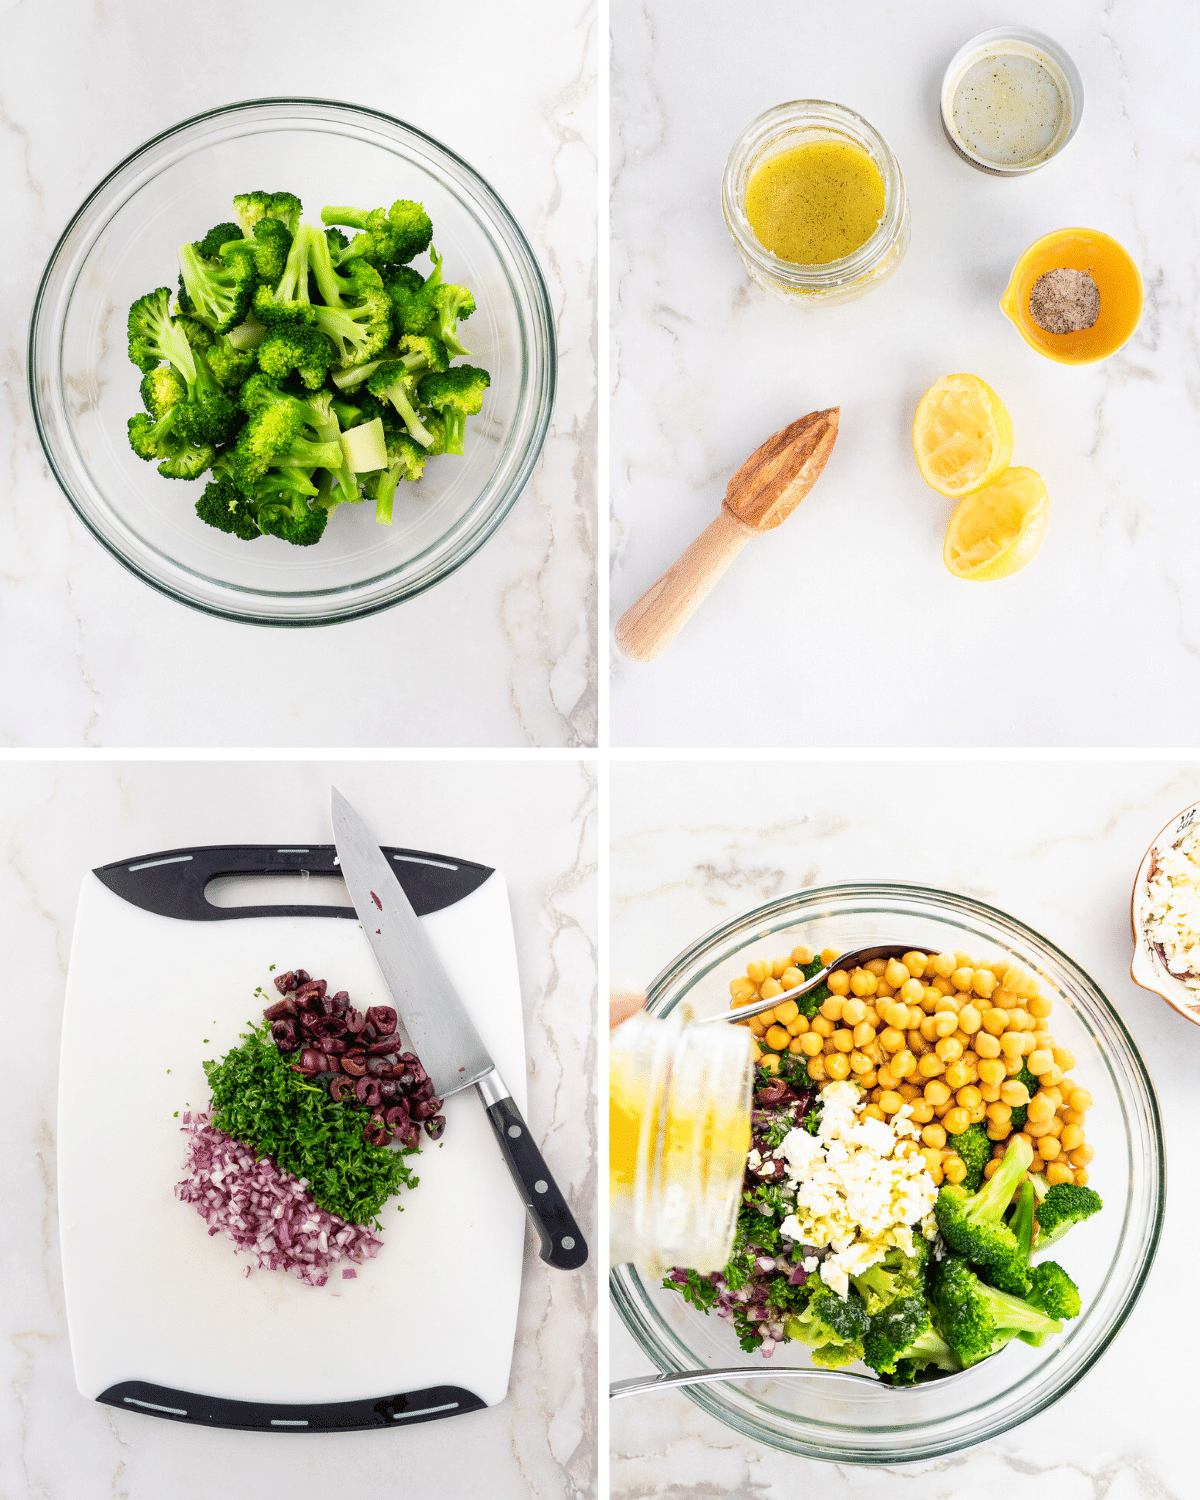 Step-by-step images of how to make chickpea broccoli salad.